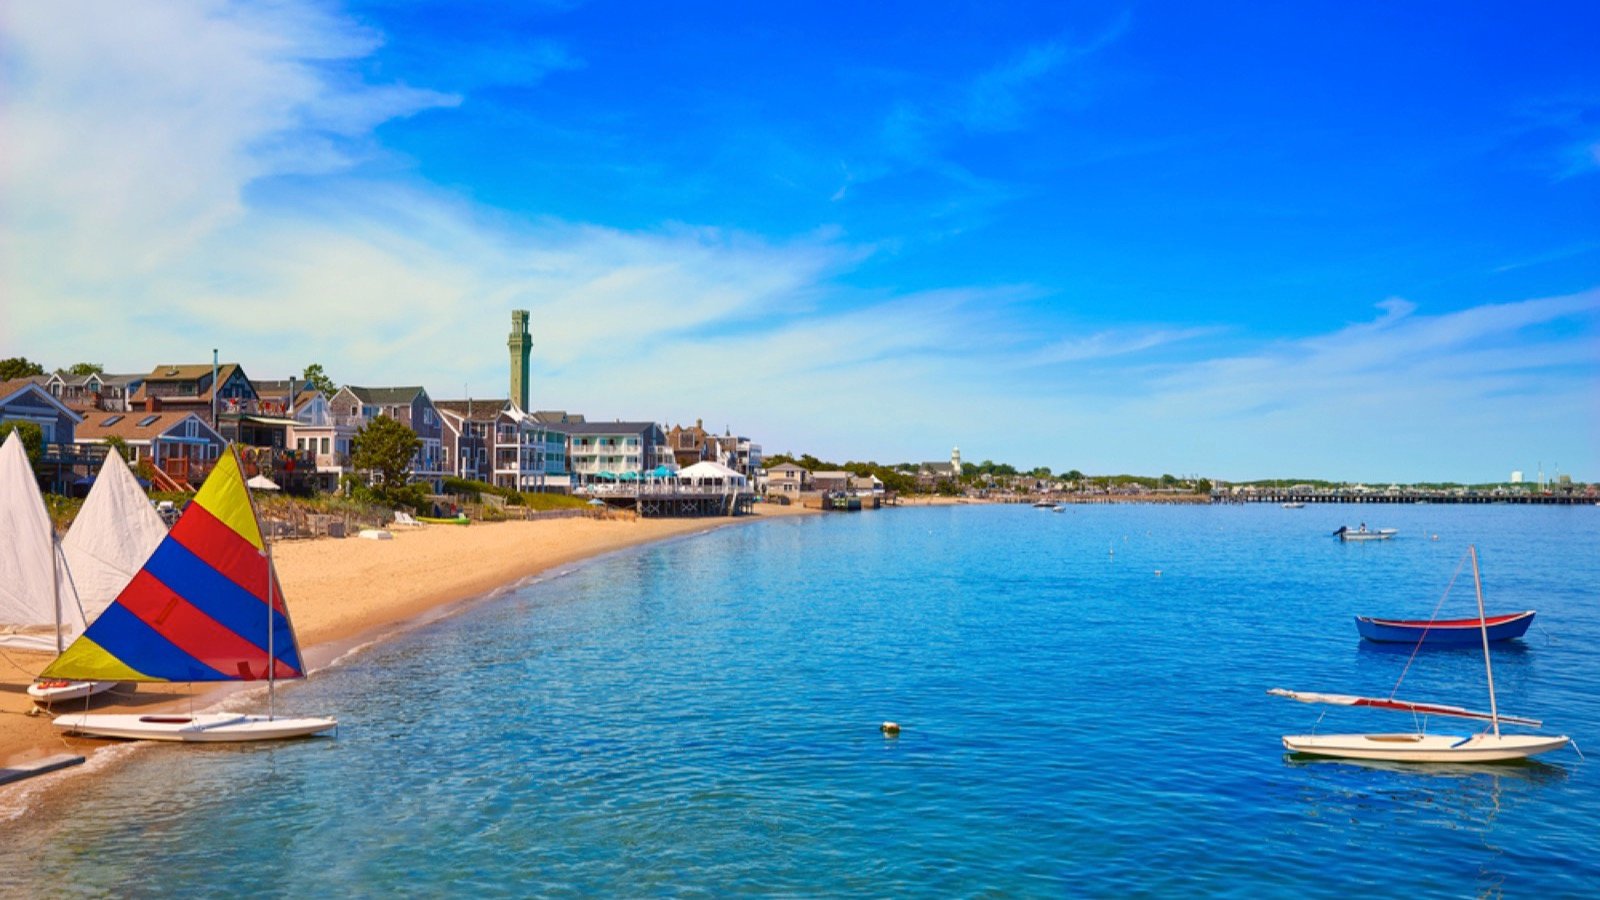 <p>Not to be confused with Providence, <a href="https://www.kindafrugal.com/15-cheap-family-activities-to-do-in-rhode-island/">Rhode Island</a>, Provincetown in Massachusetts is at the very tip of Cape Cod. This historic spot beautifully captures the spirit of Cape Cod. There are endless shops and businesses to visit, from candy stores to lobster roll shacks and beachside bars.</p><p>Of course, beach days are a popular activity, but you can take ferry rides, sail around the Cape, see wildlife around the area, or climb to the tip-top of a lighthouse. The colorful houses and relaxed atmosphere make this a unique location, ideal for a romantic trip.</p>